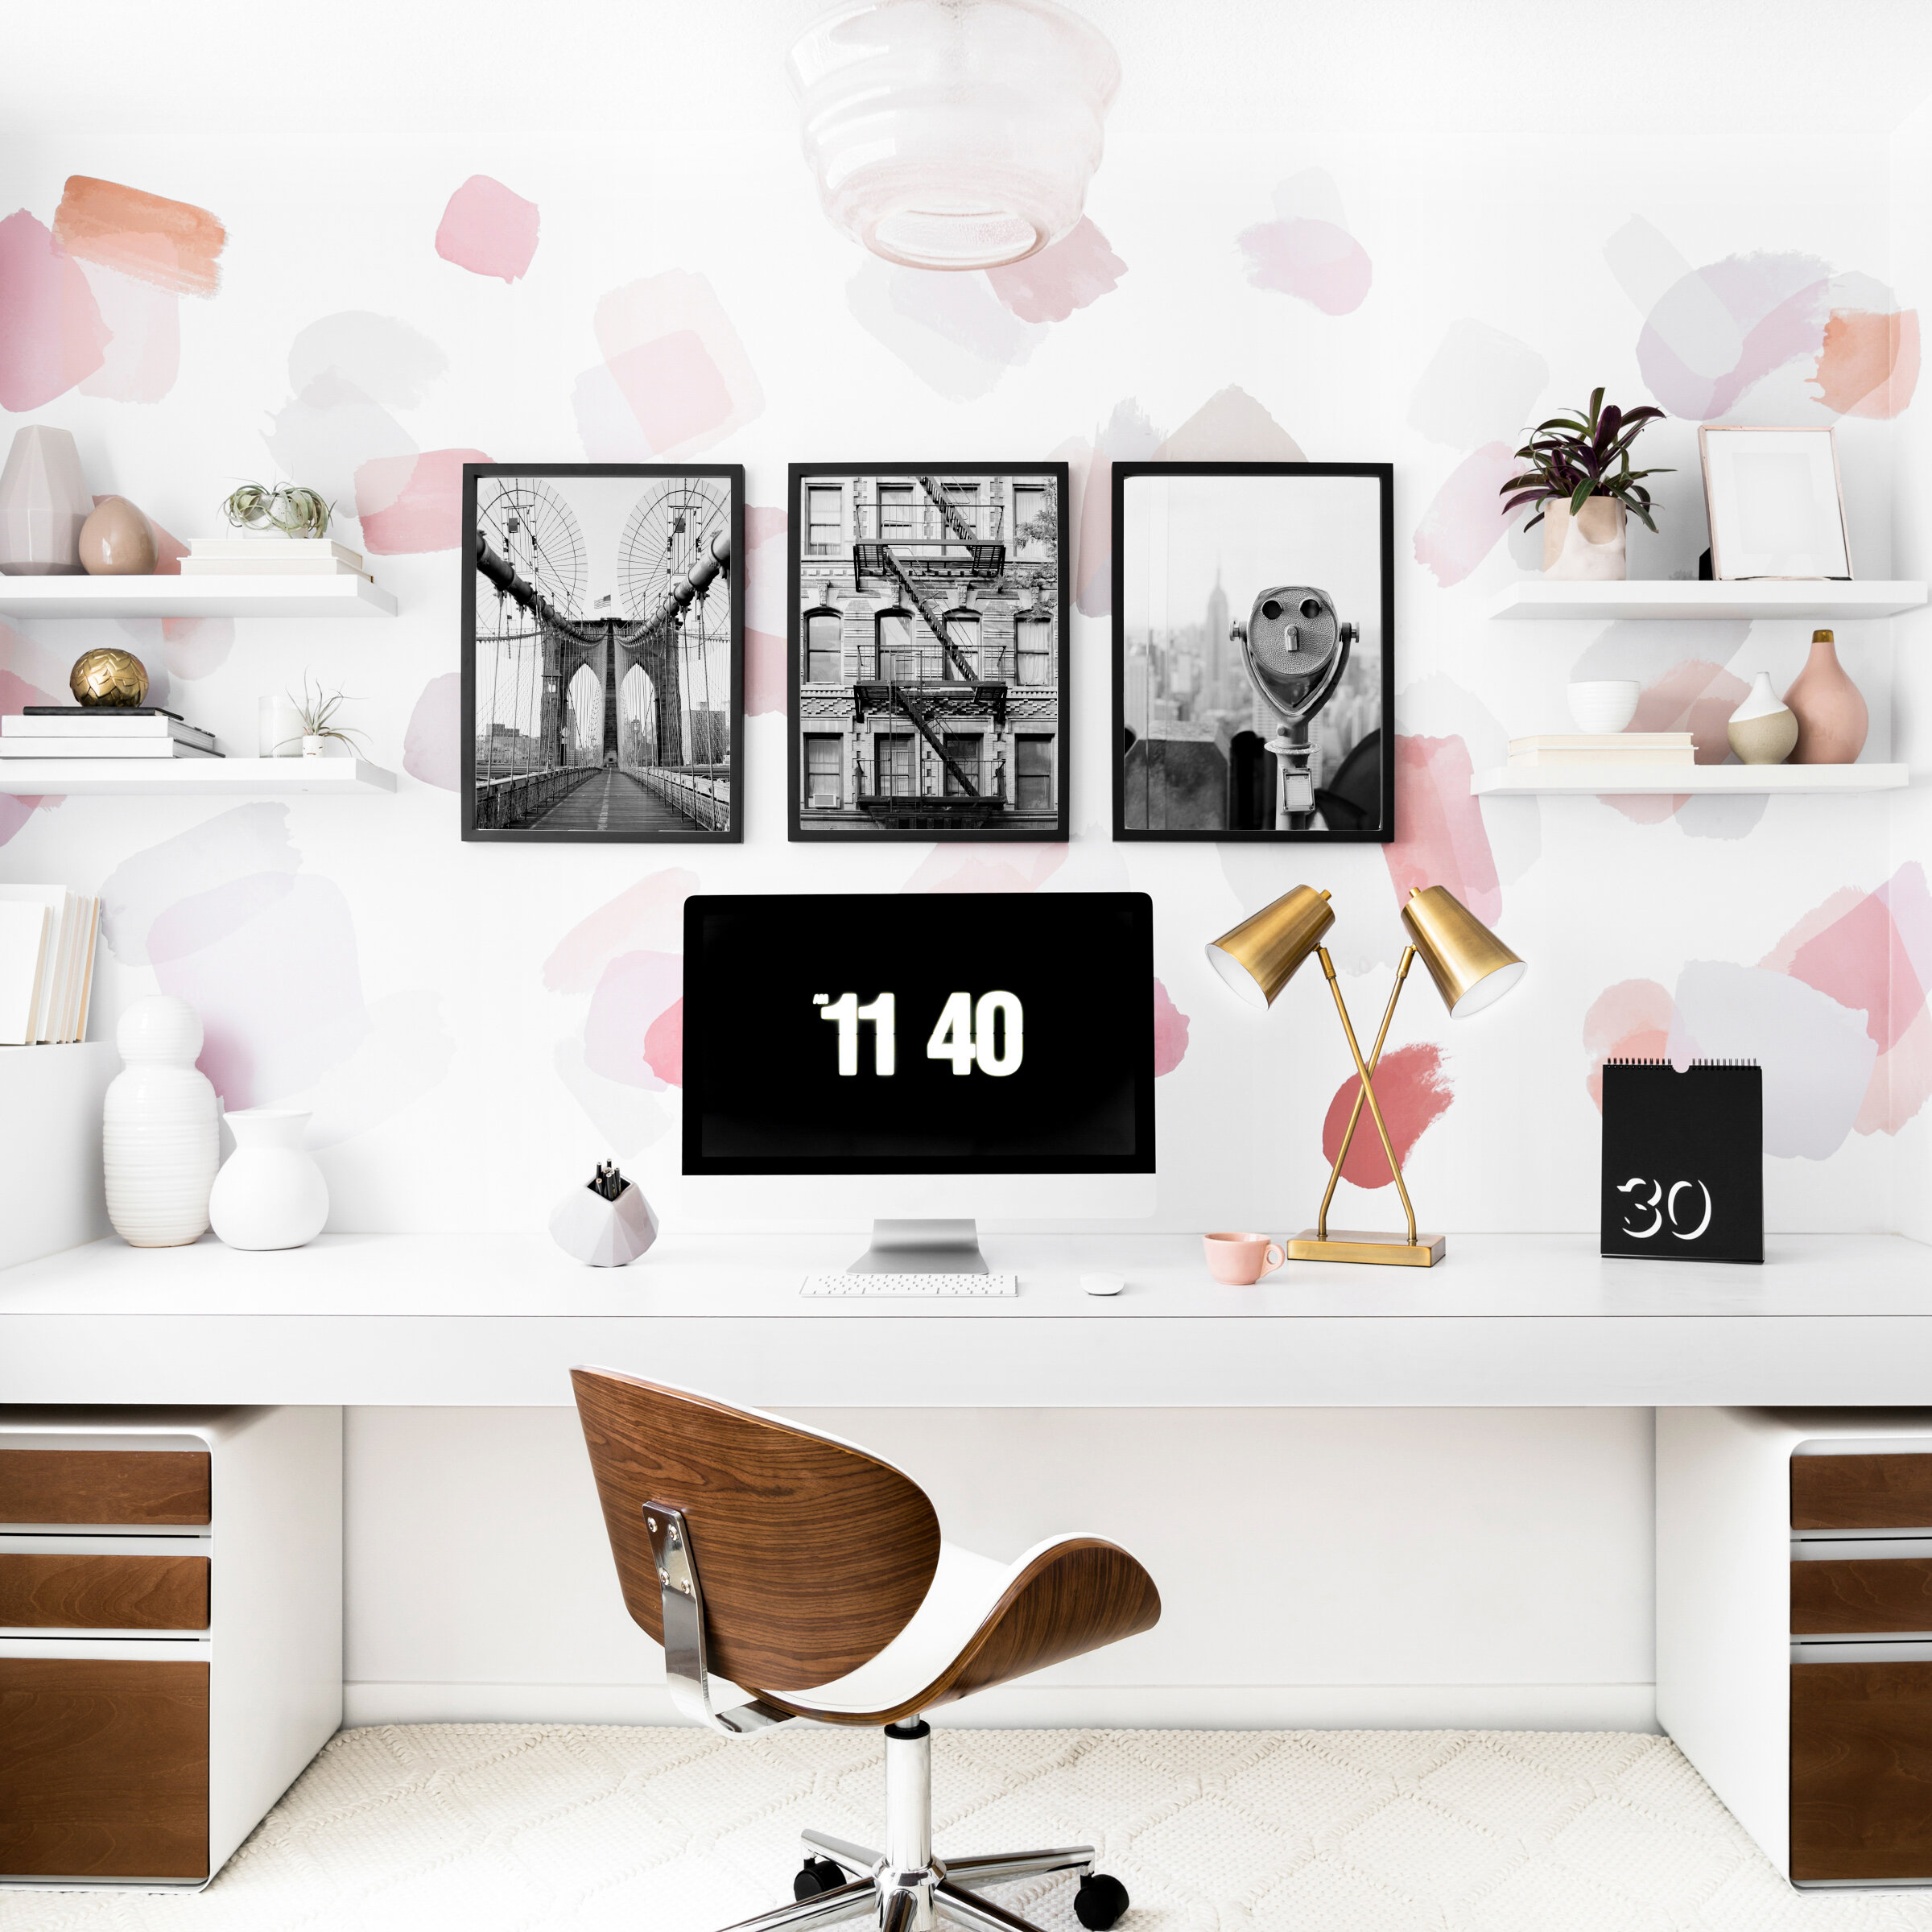 haute-stock-photography-home-office-collection-final-2 copy.jpg